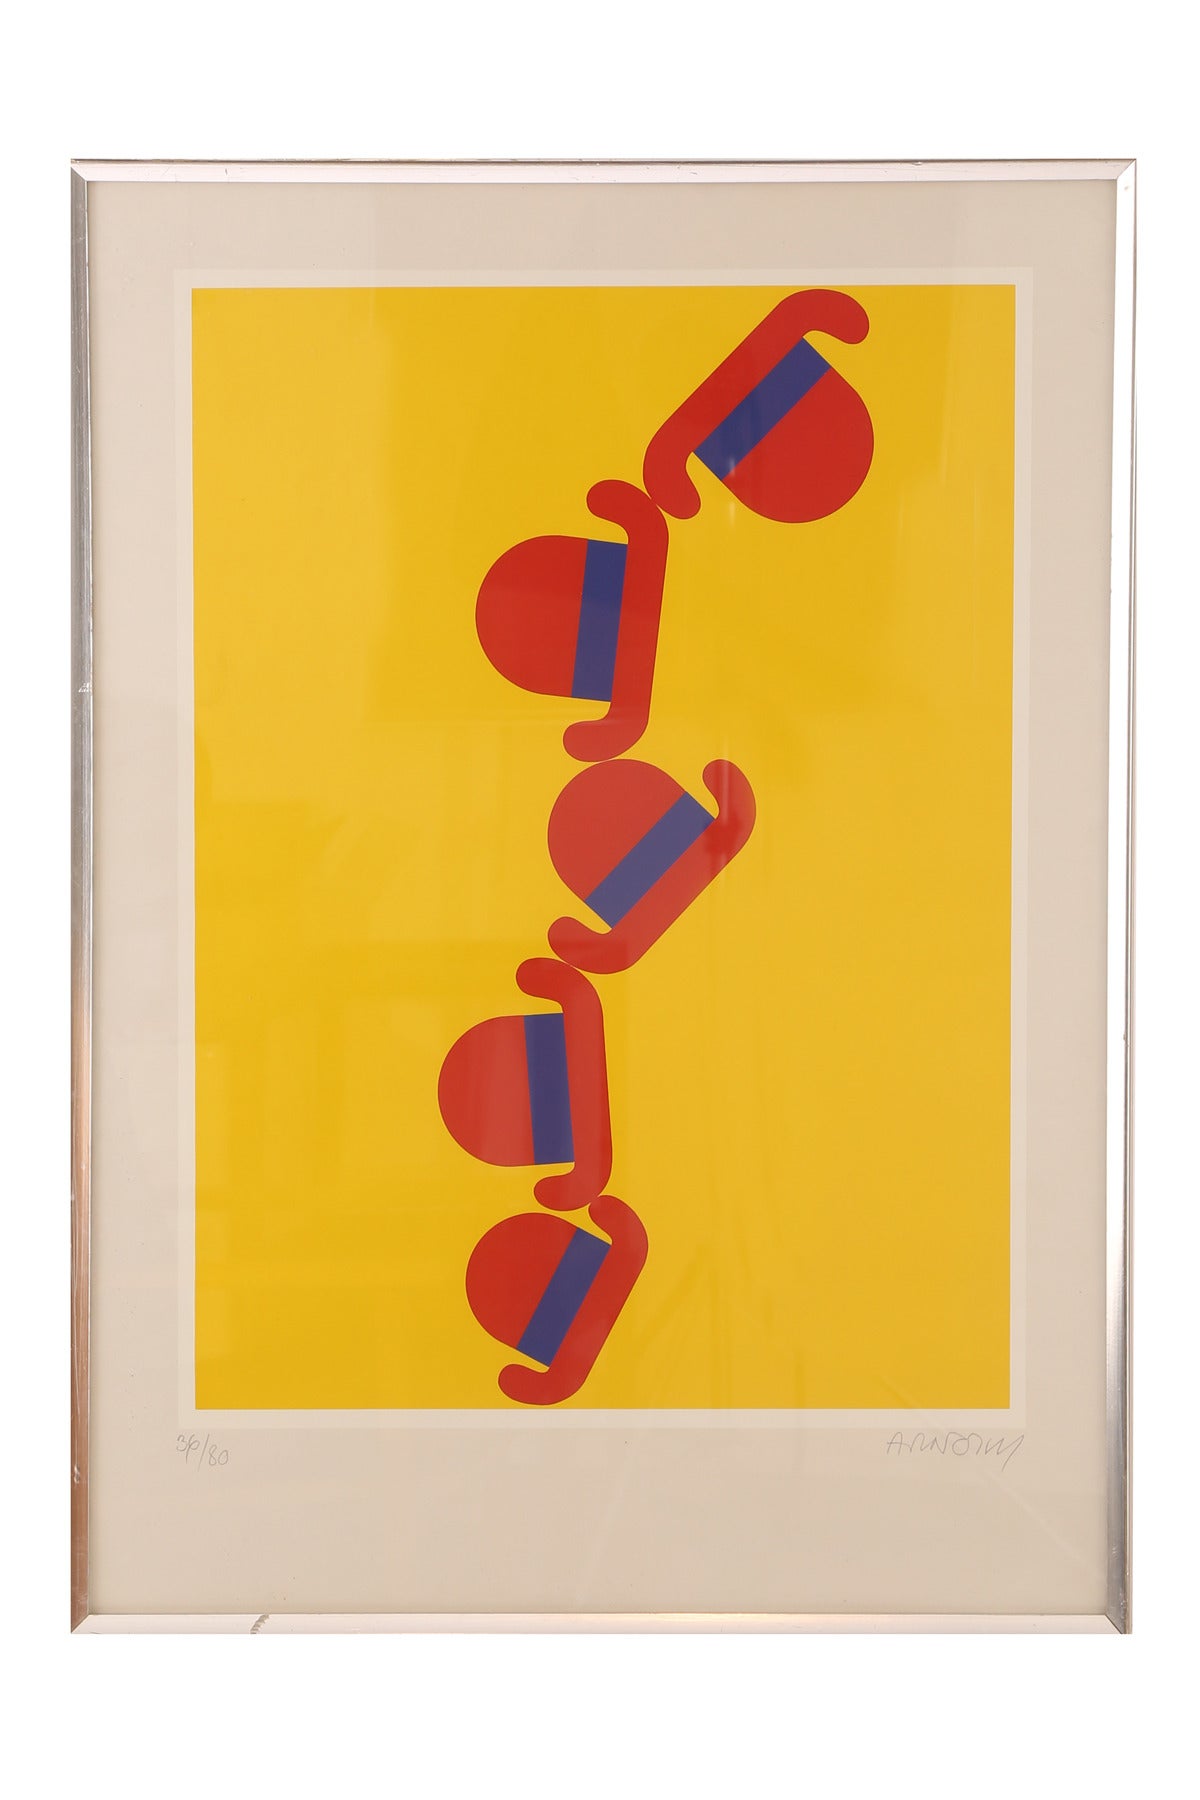 Pair of Per Arnoldi signed serigraphs, circa early 1970s. These pop examples use fantastic bright colors mixed with a little whimsy to create fun art pieces. Price is for the pair. Smaller example measures: 35.5